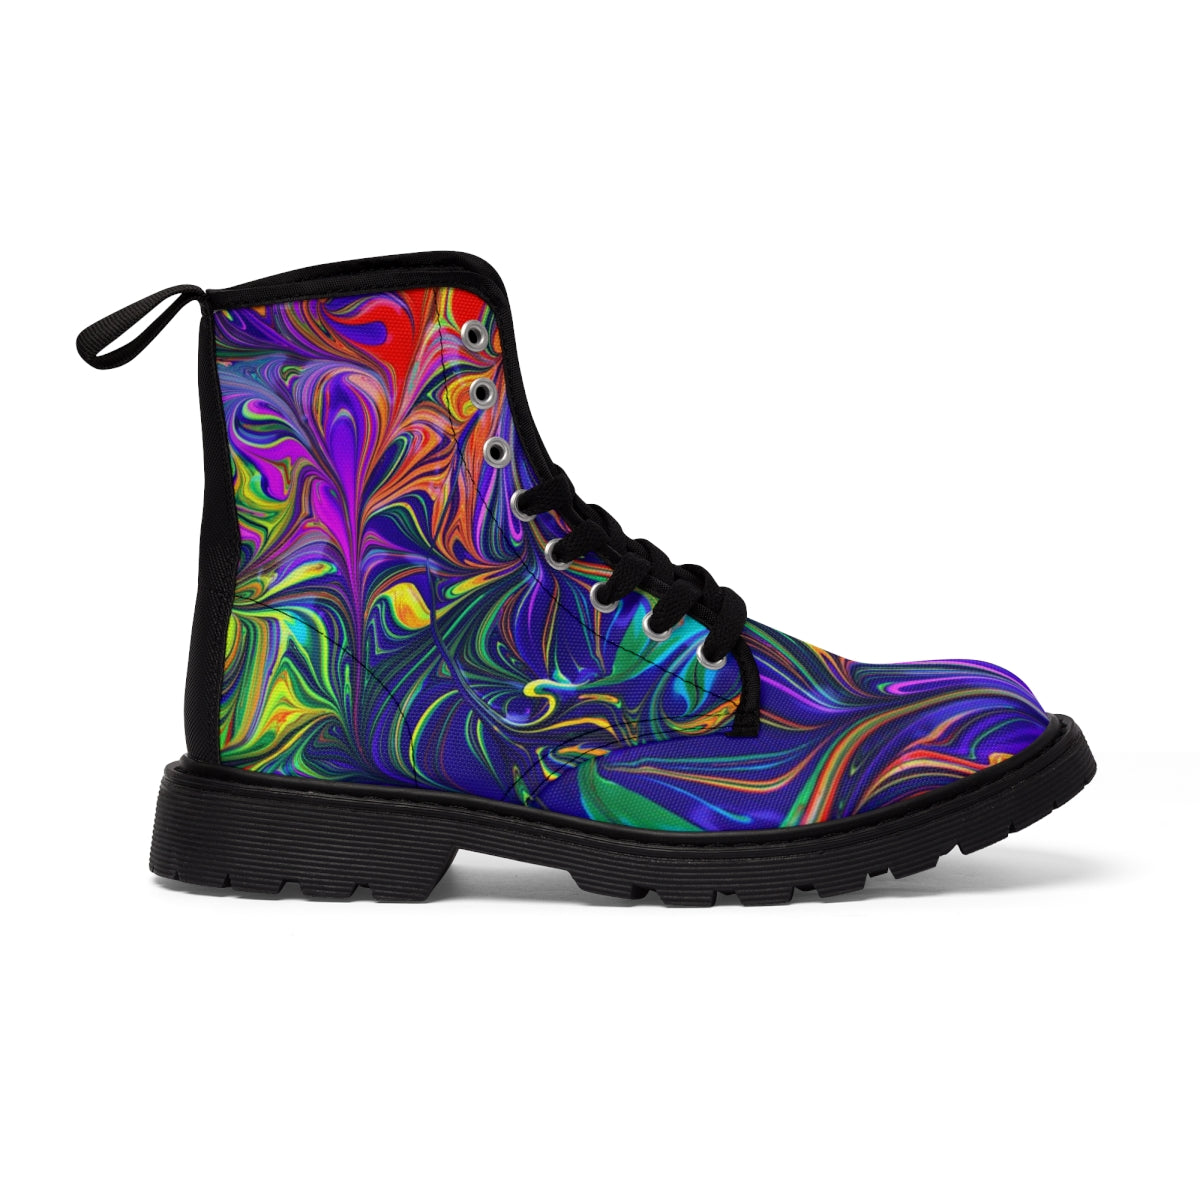 Women's Canvas Boots with colorful design